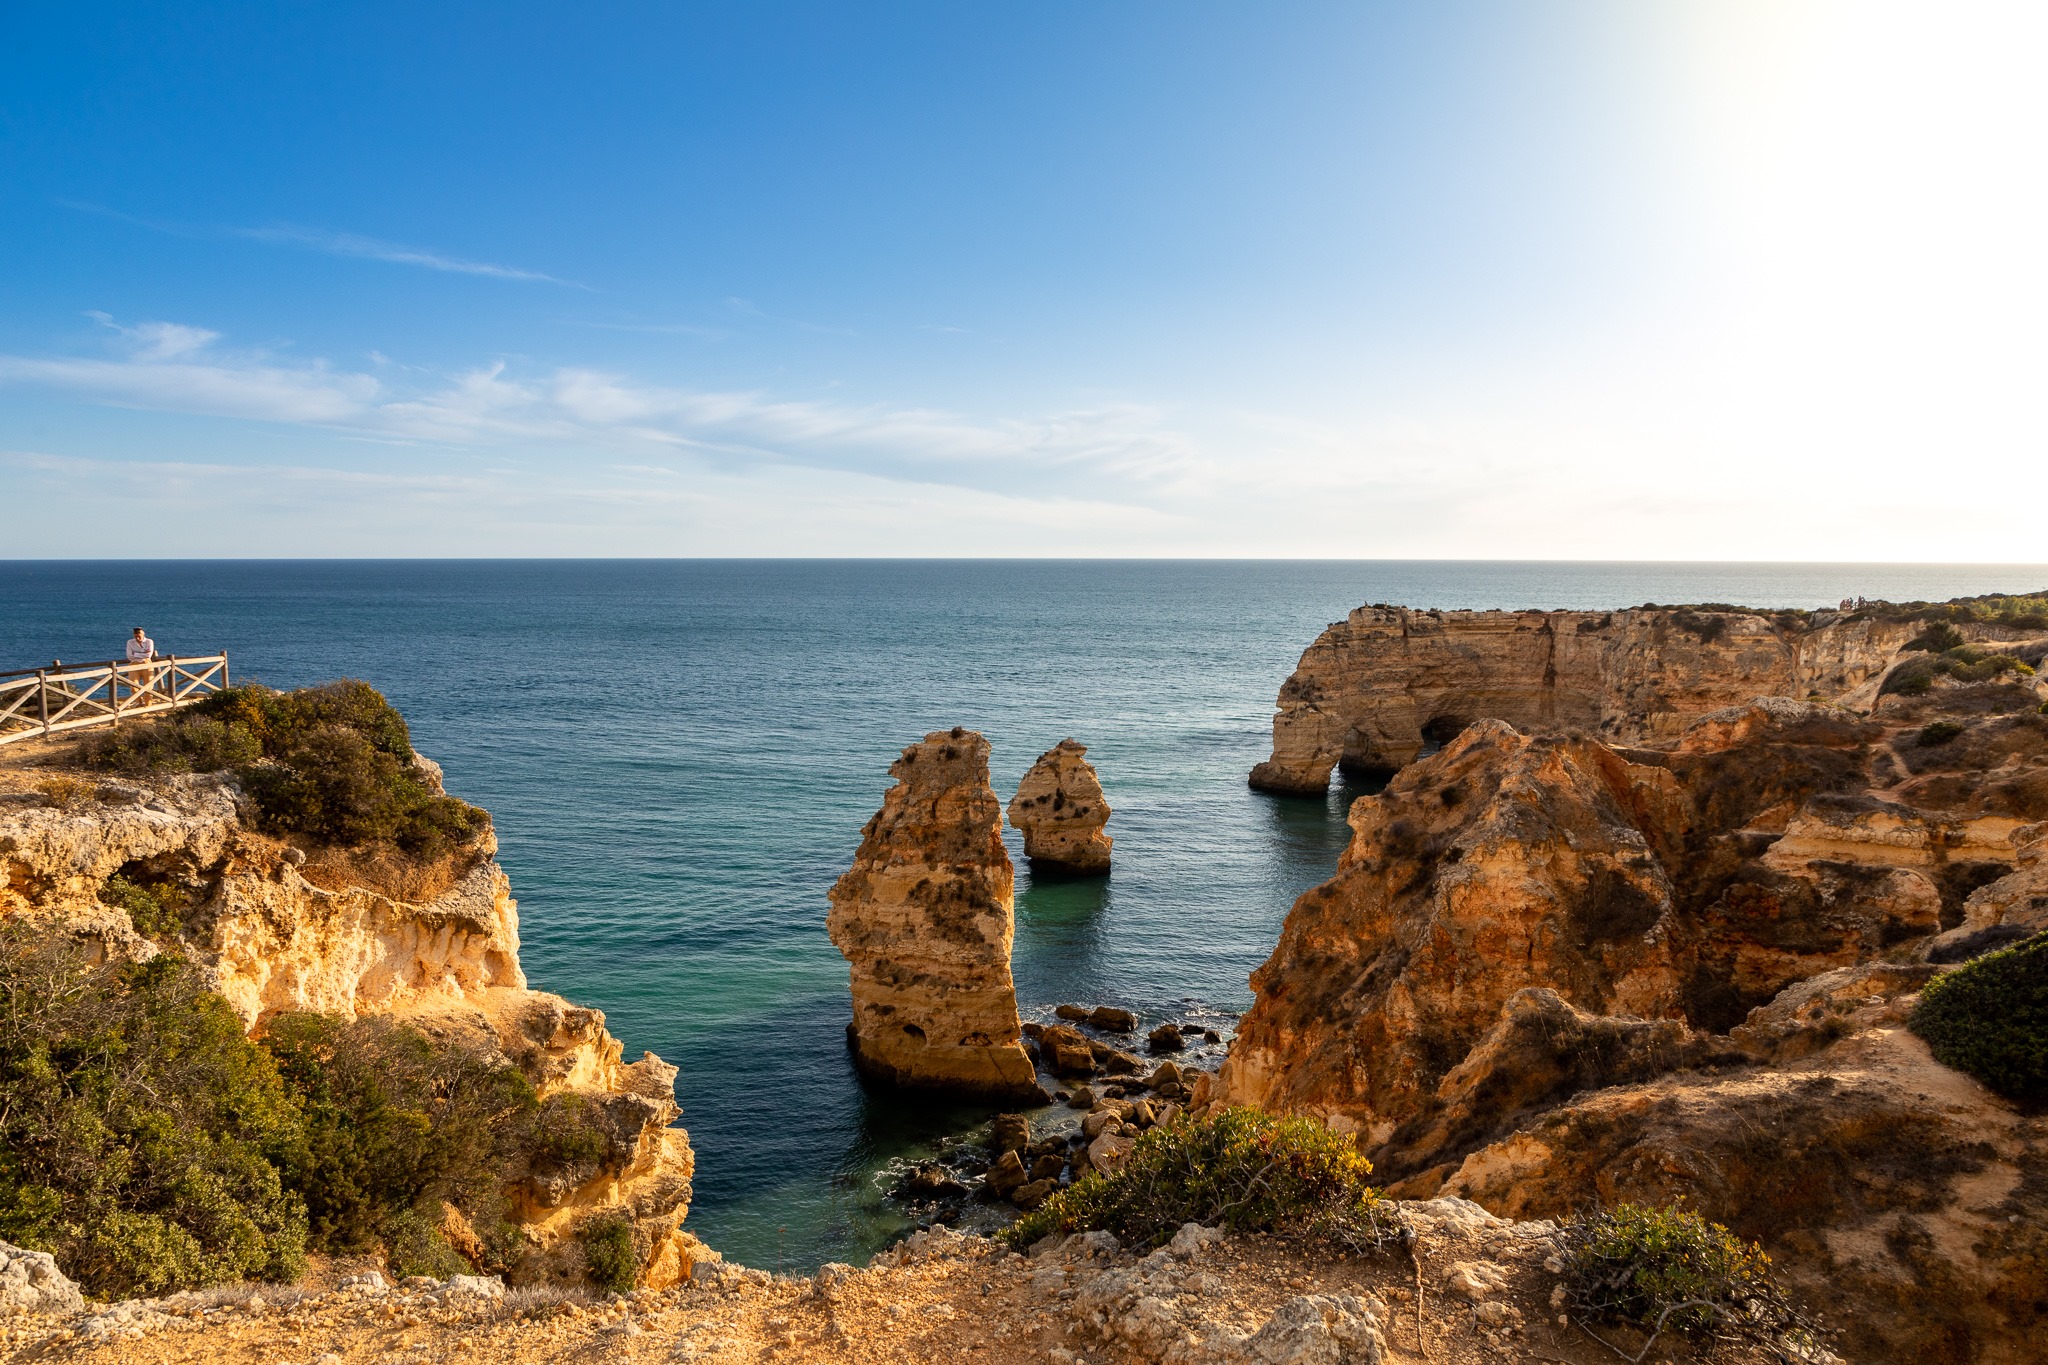 Explore the Algarve coast by foot and boat